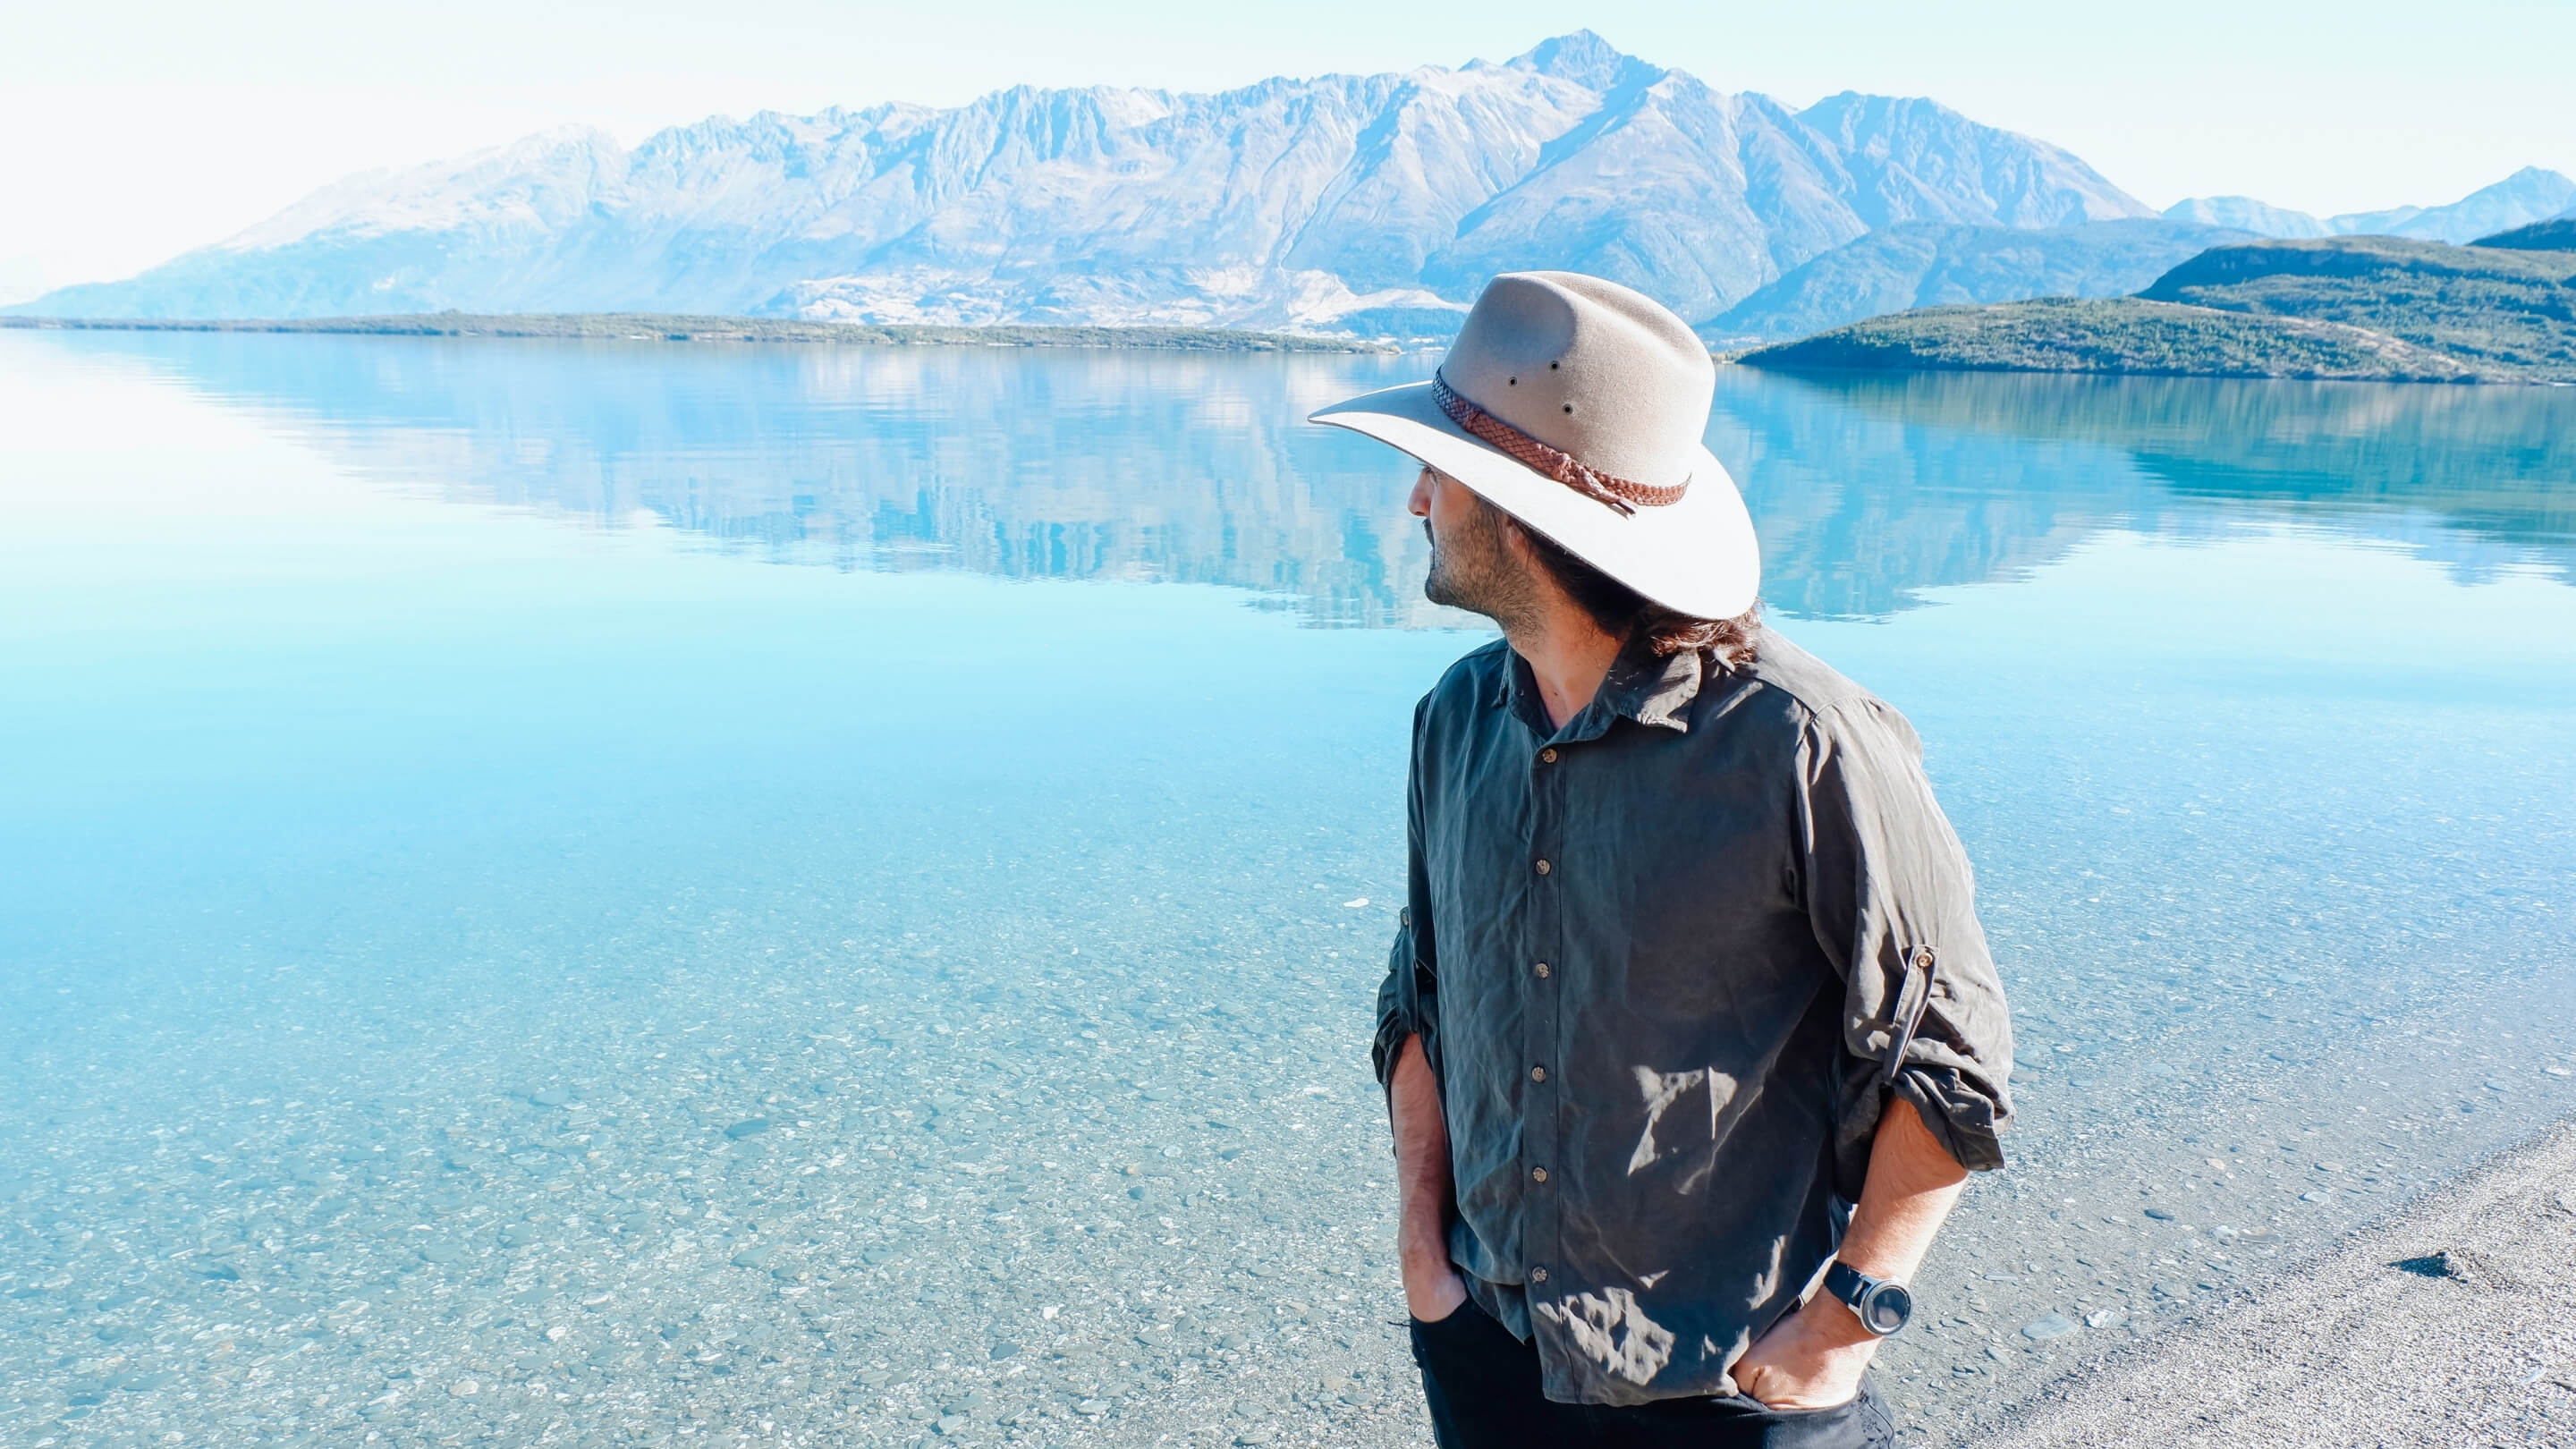 Man wearing Akubra hat staring our across a lake with mountains in the background.